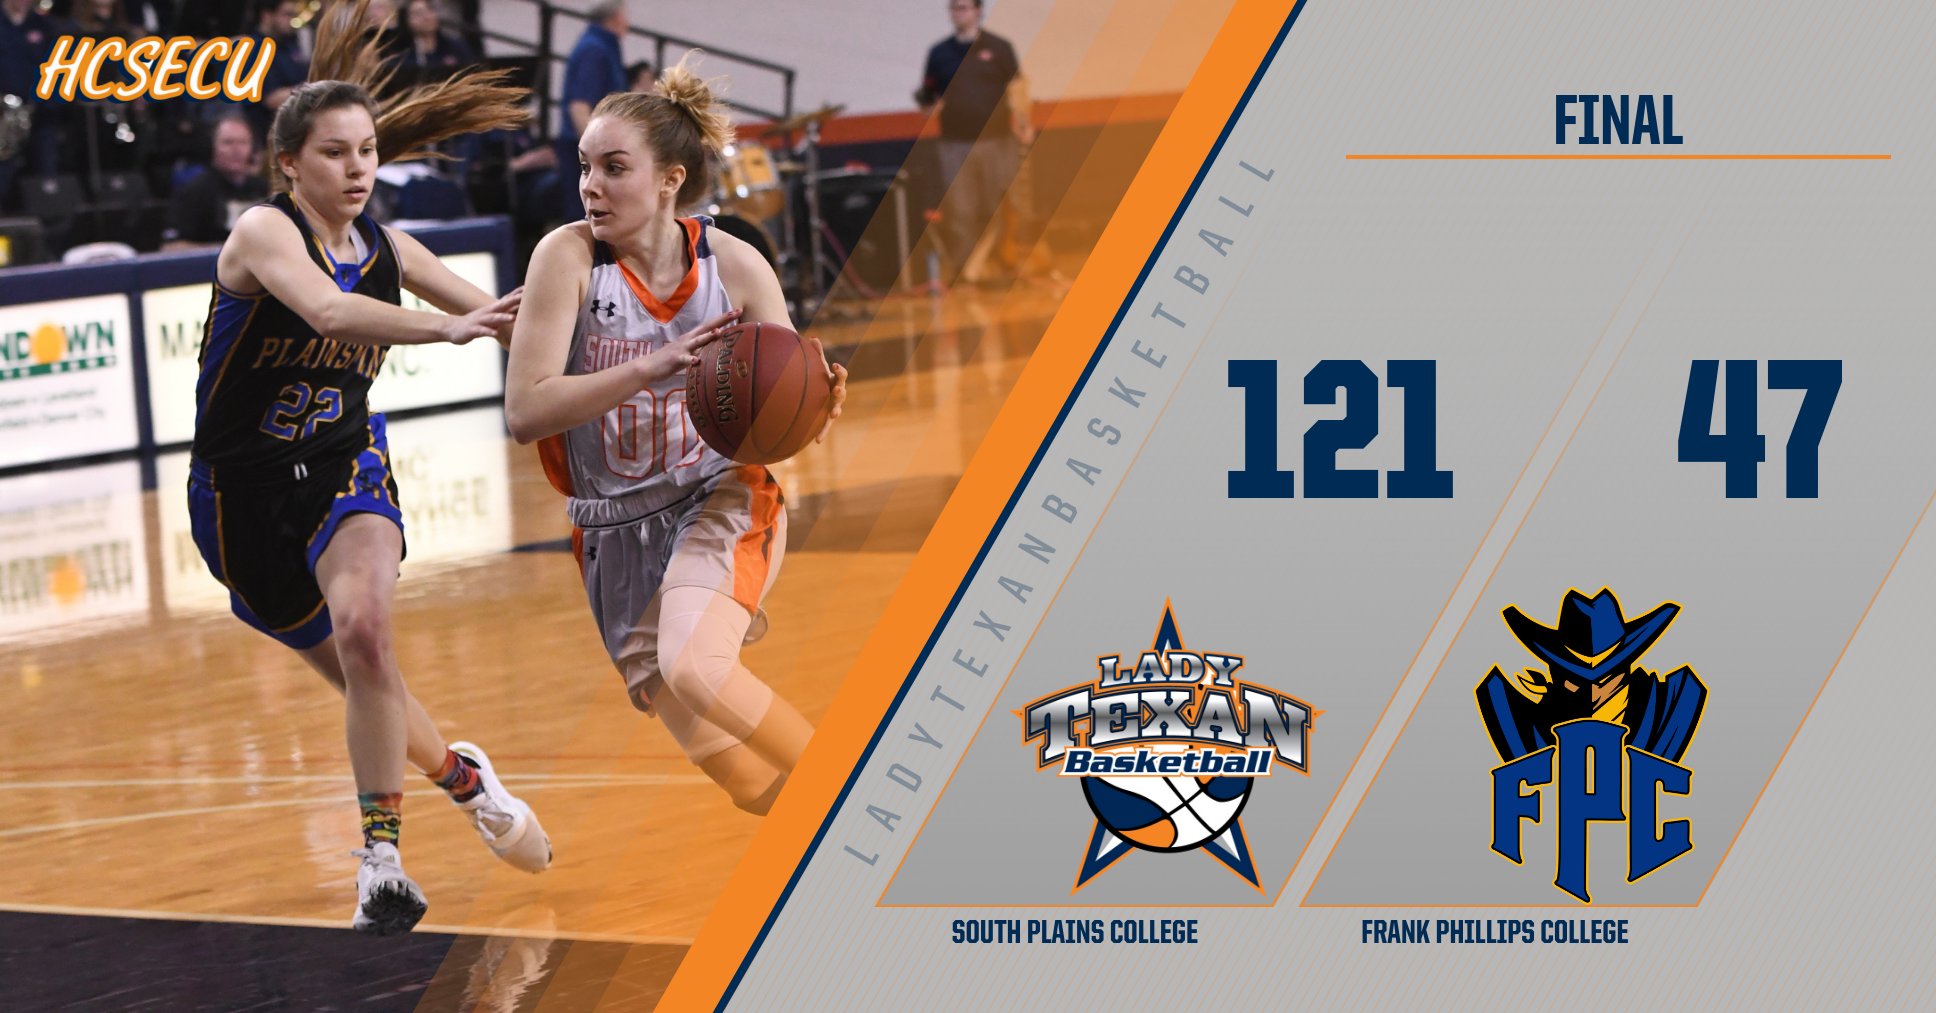 No. 3 Lady Texans rout Frank Phillips 121-47 Monday